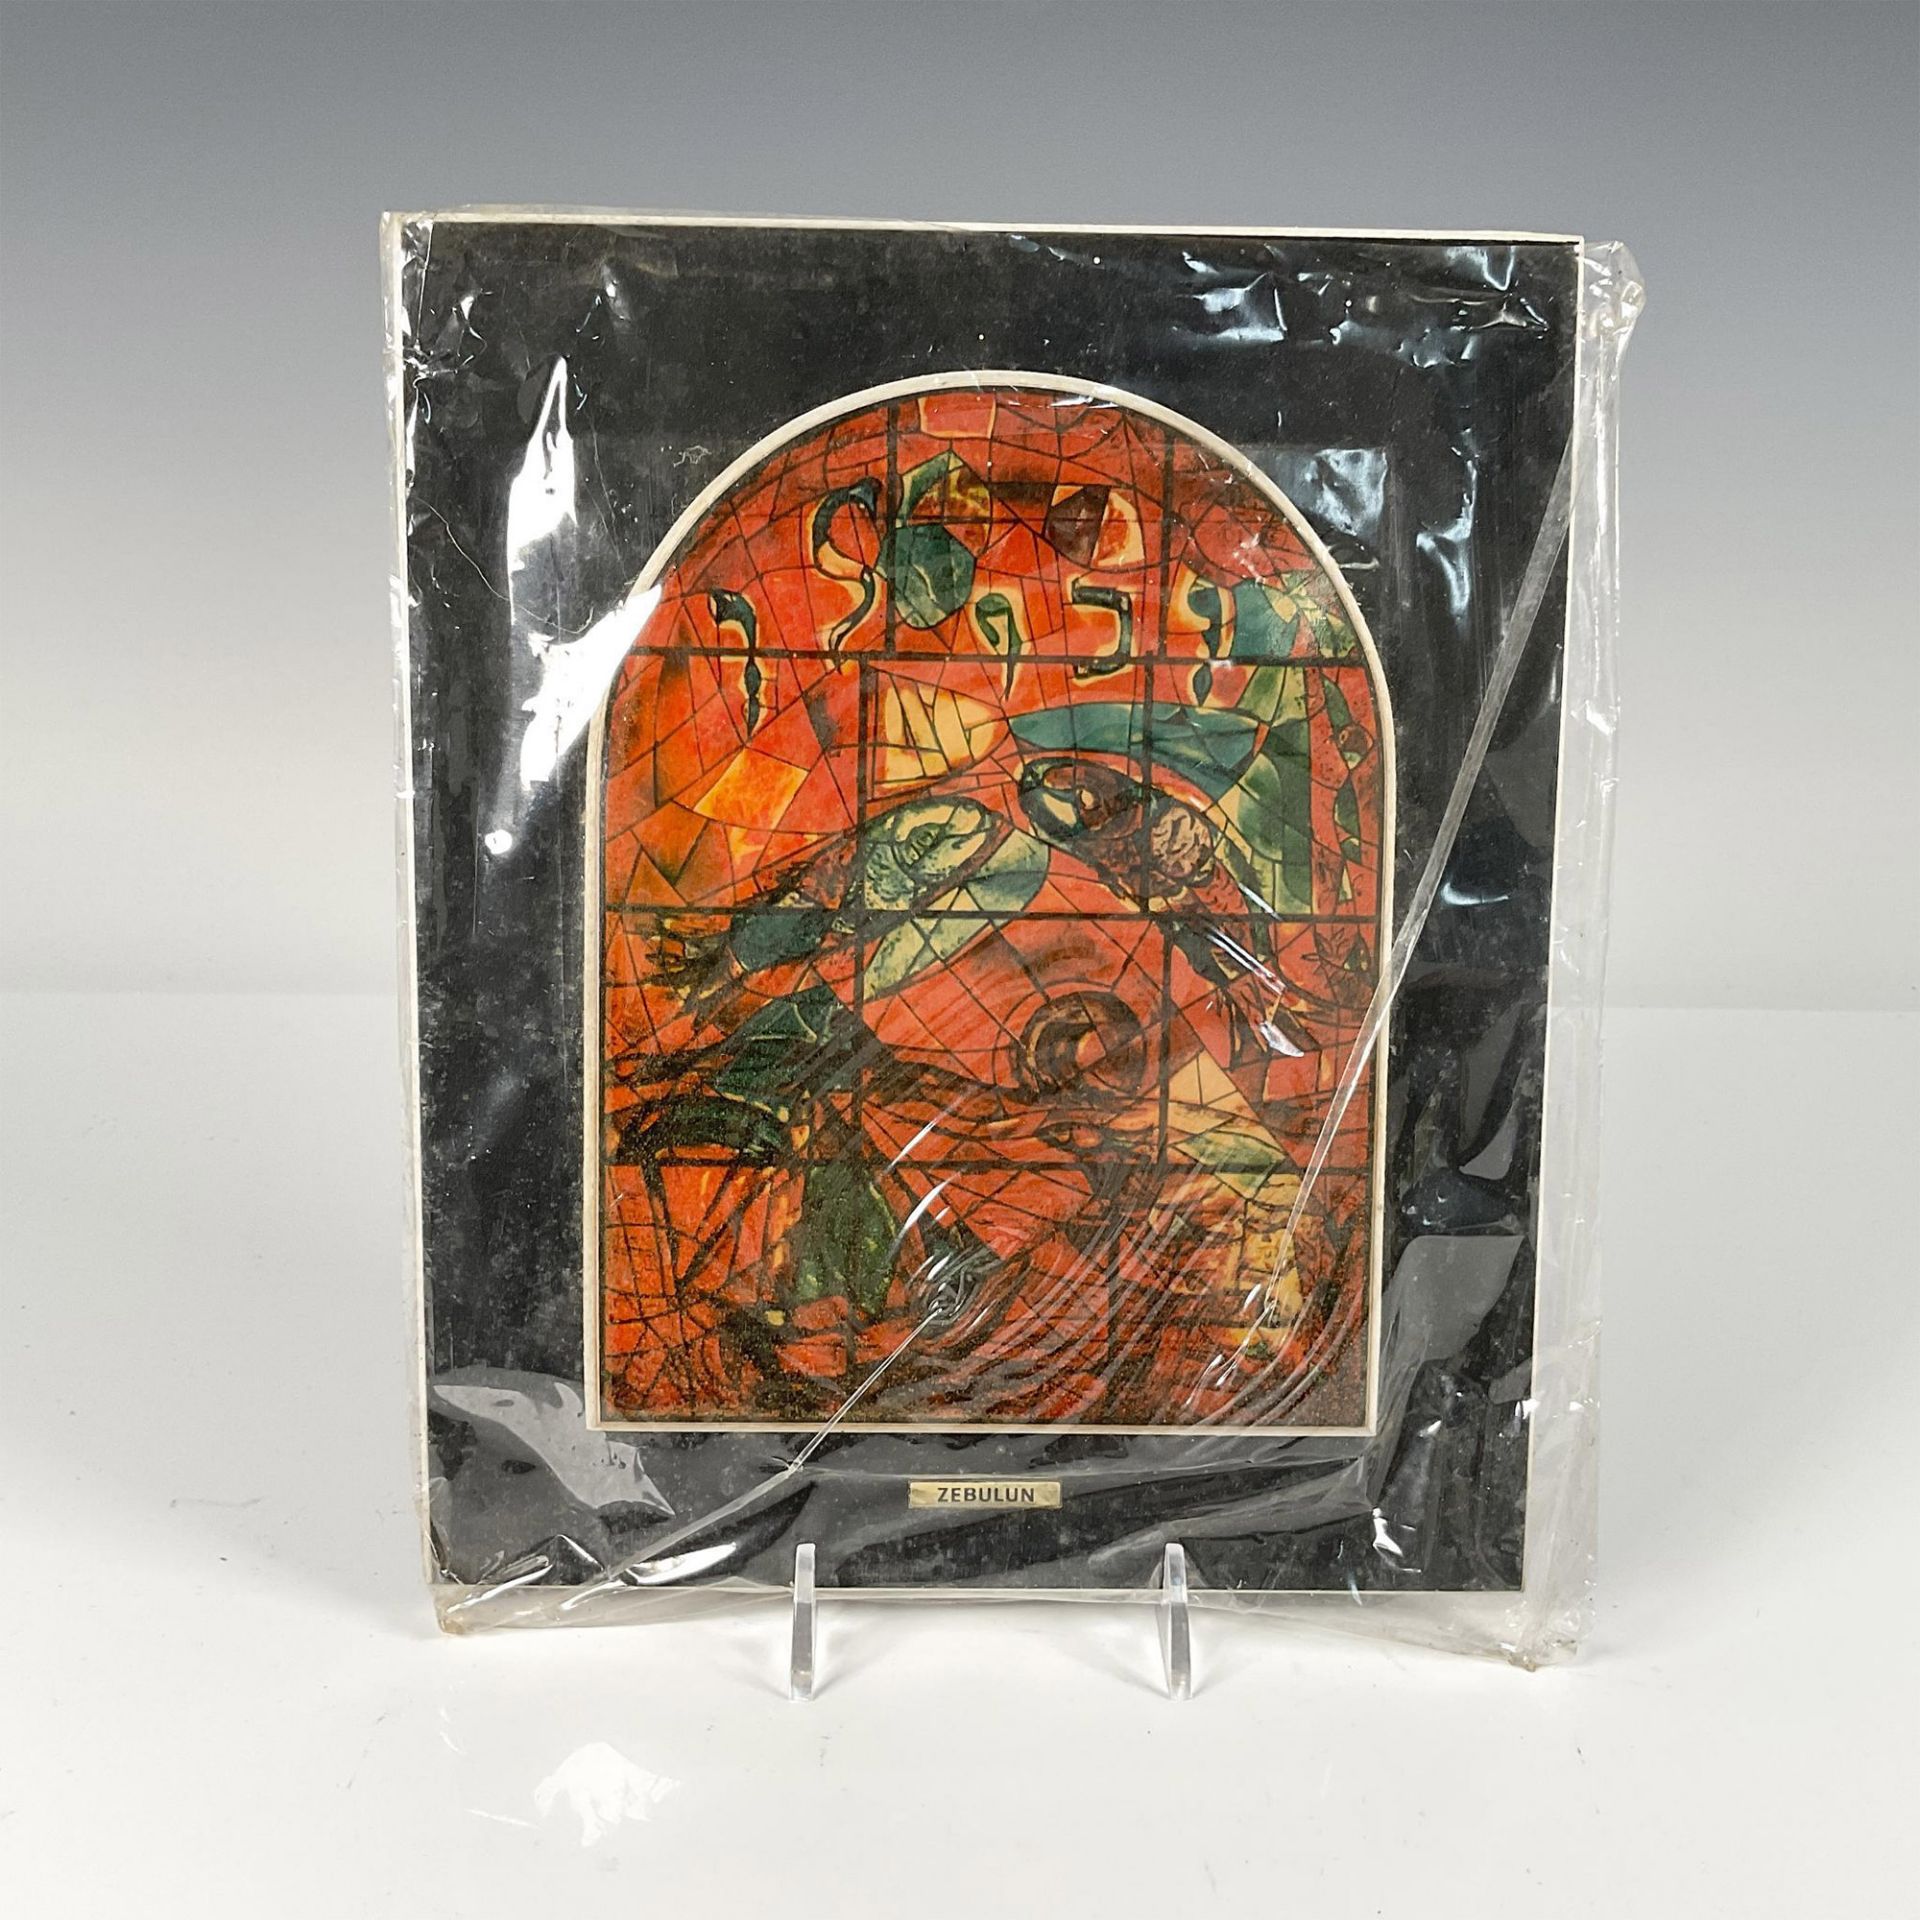 13pc After Marc Chagall by Avissar Wooden Plaques, The 12 Stained Glass Windows - Image 12 of 20